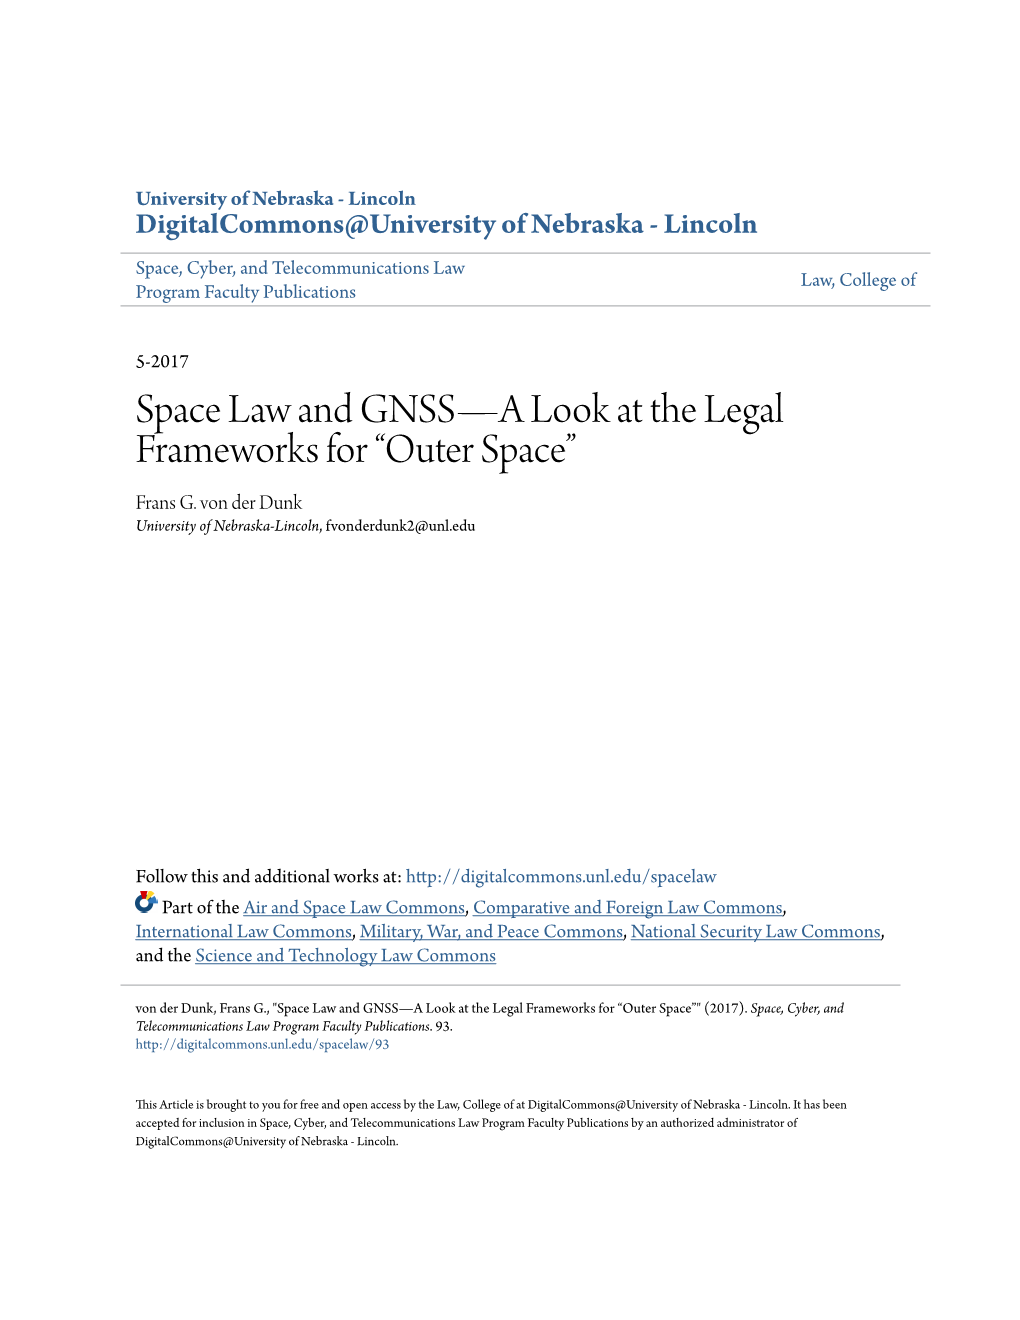 Space Law and GNSS—A Look at the Legal Frameworks for “Outer Space” Frans G